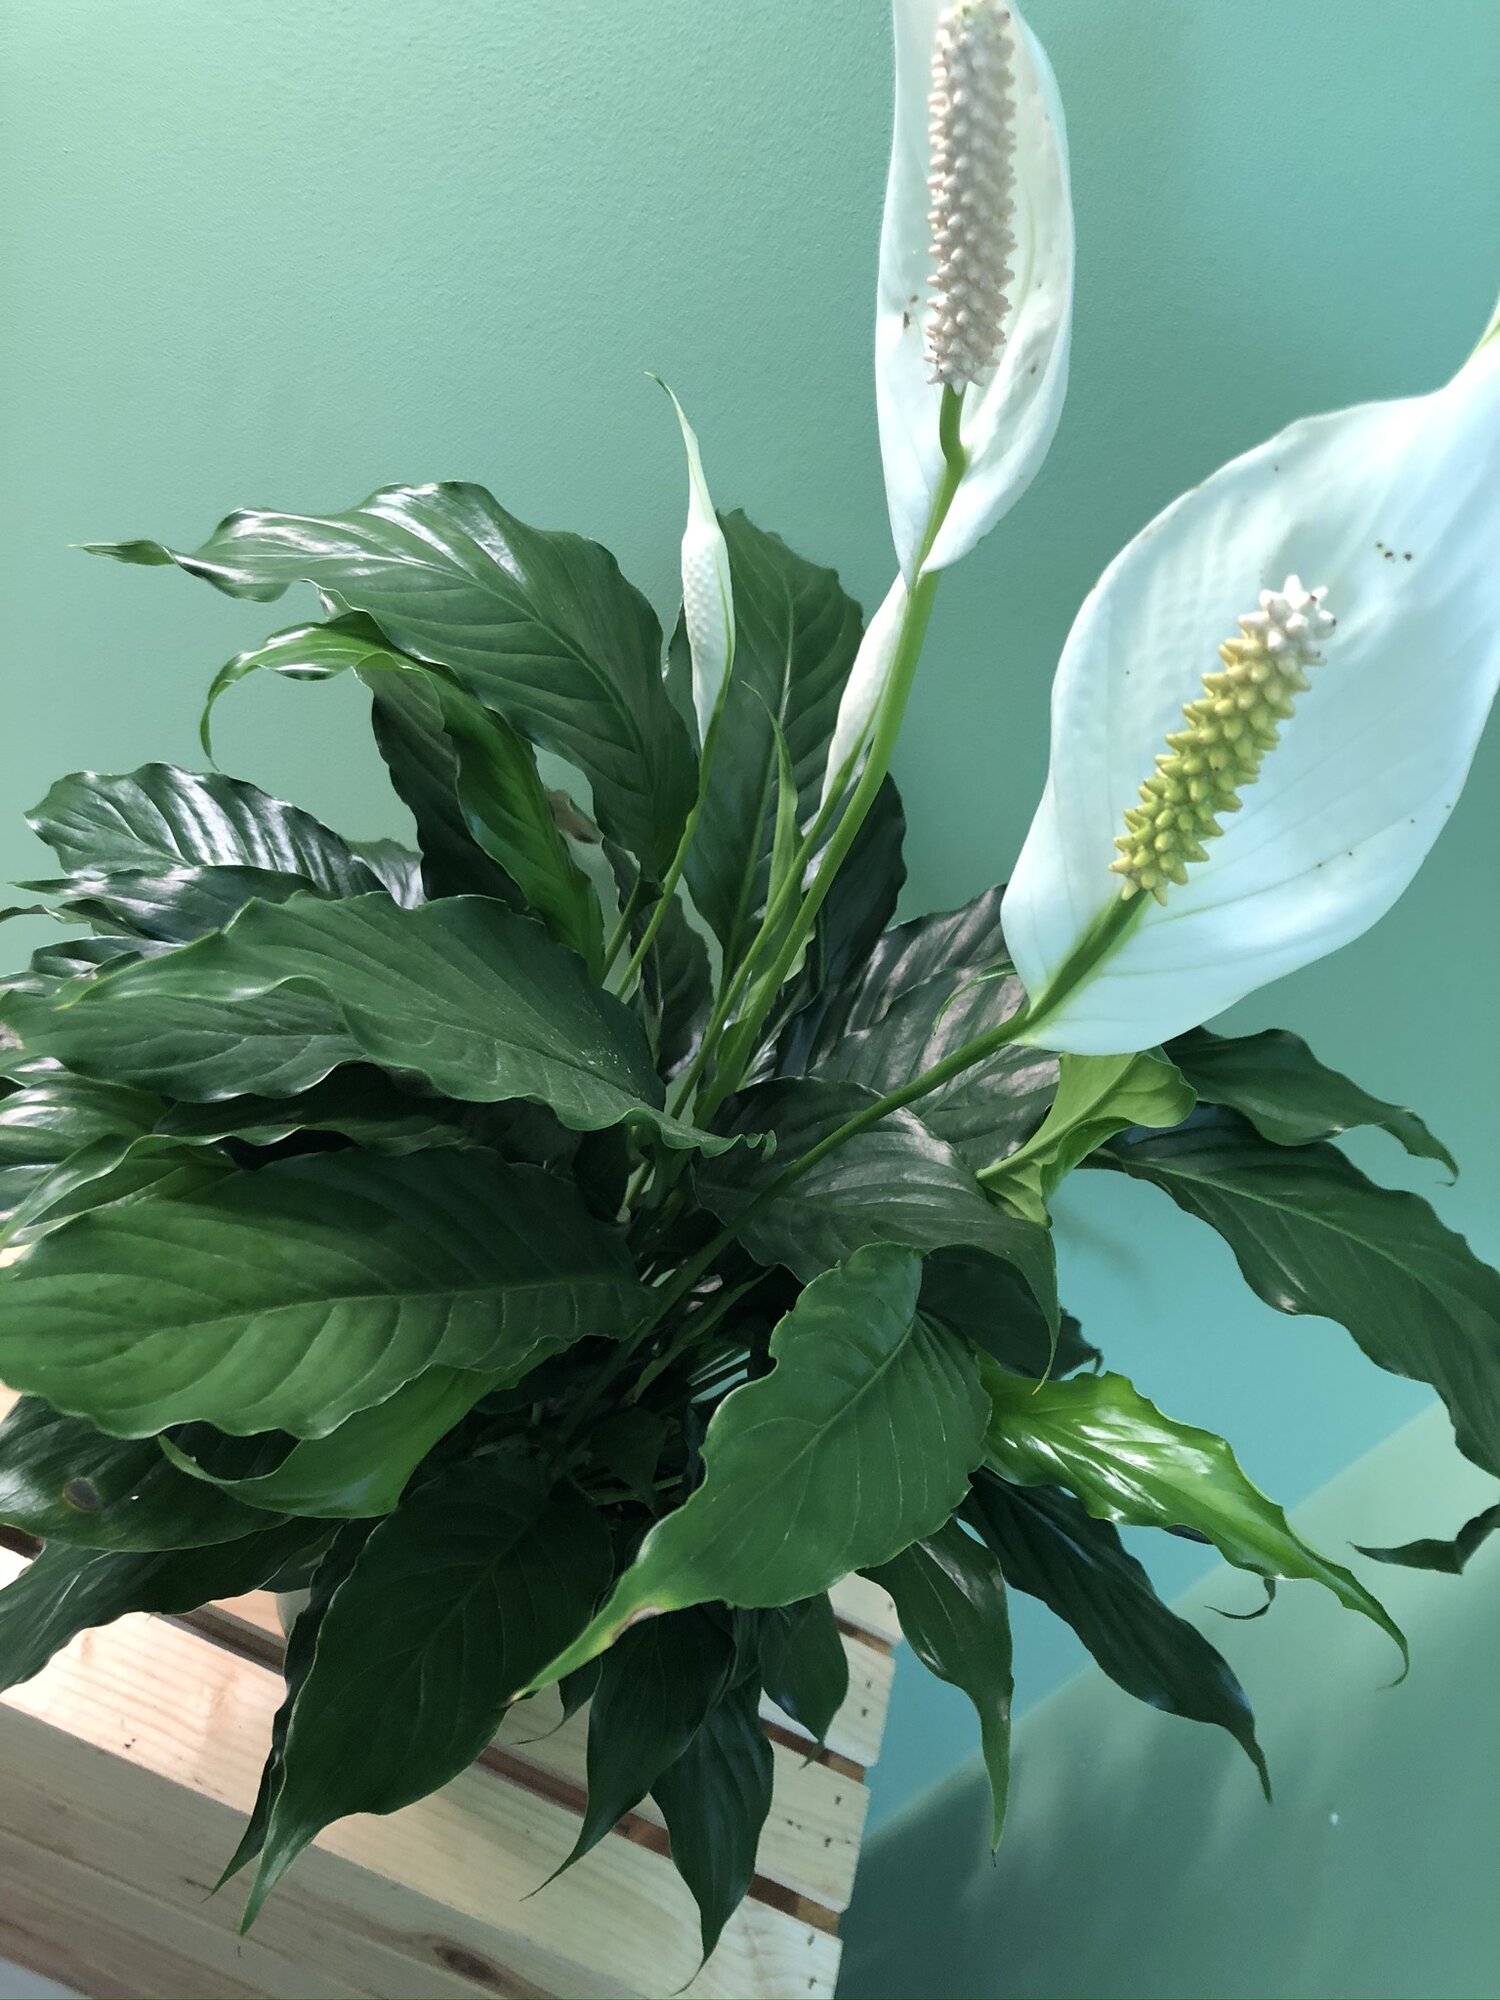 Spaths are one of my favorite houseplants because they have such gorgeous flowers and leaves and they are one of the best air purifiers! They love their water, so I typically recommend watering them once a week by submerging them up to the first few…